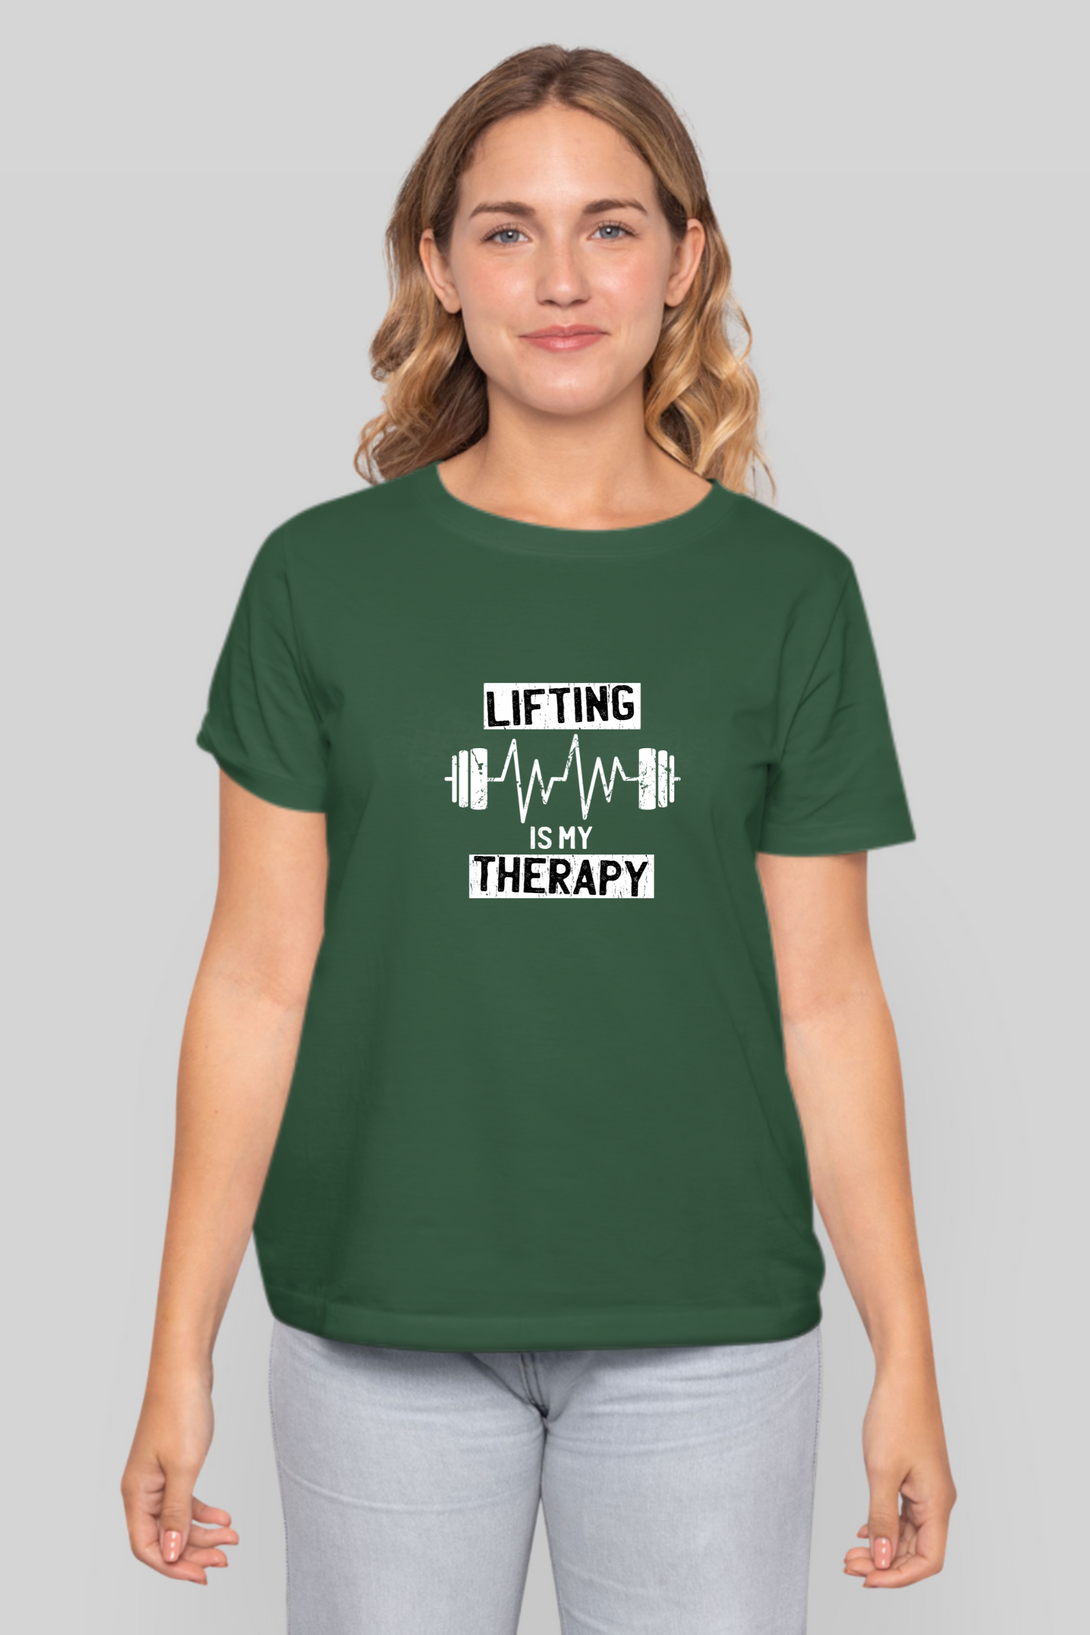 Lifting Is My Therapy Printed T-Shirt For Women - WowWaves - 14